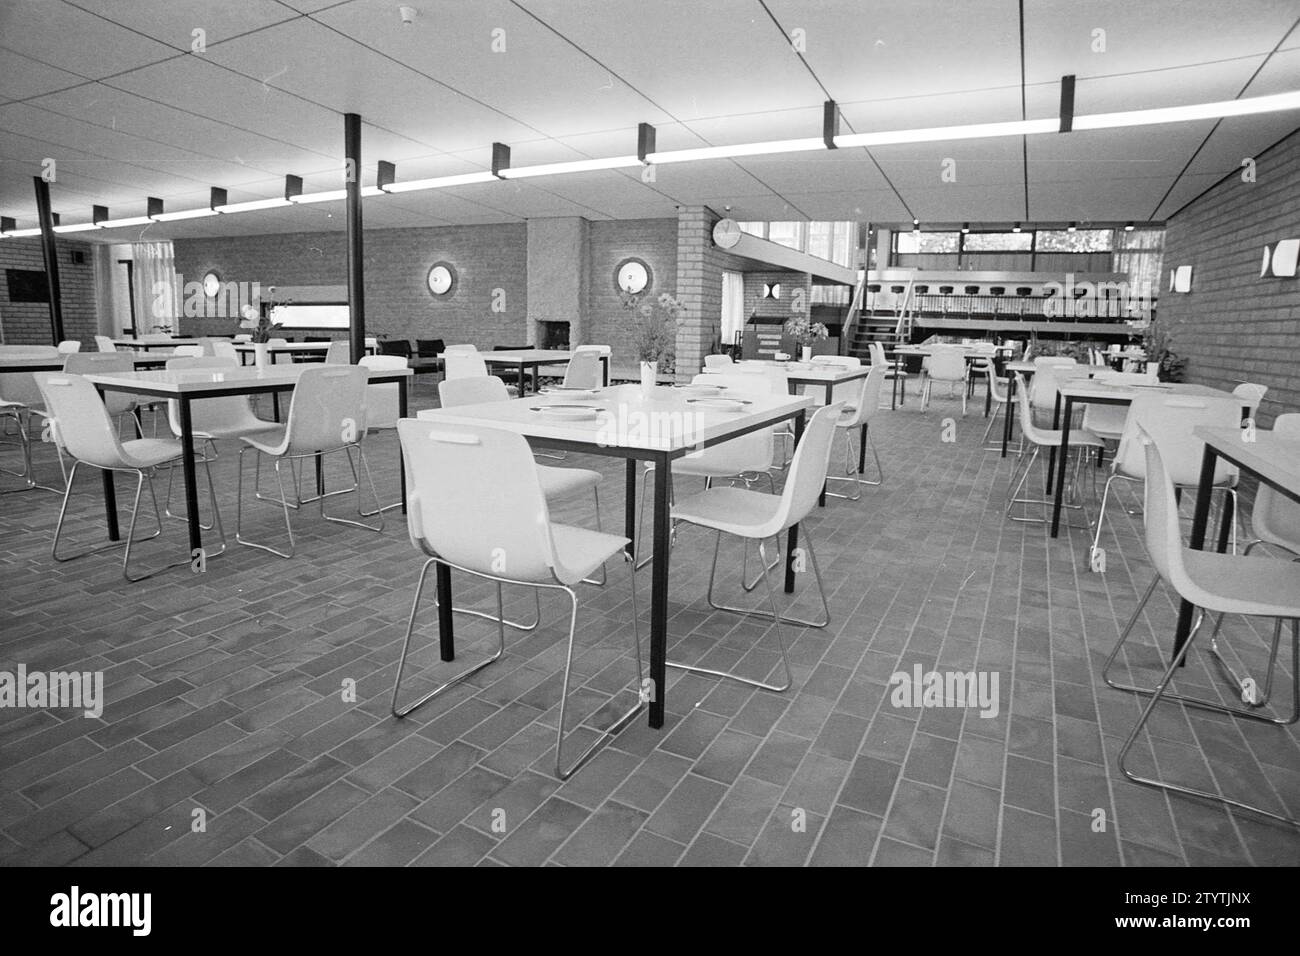 Vogelzang Foundation, Interior, Bennebroek, Rijksstraatweg, 24-08-1972, Whizgle News from the Past, Tailored for the Future. Explore historical narratives, Dutch The Netherlands agency image with a modern perspective, bridging the gap between yesterday's events and tomorrow's insights. A timeless journey shaping the stories that shape our future. Stock Photo